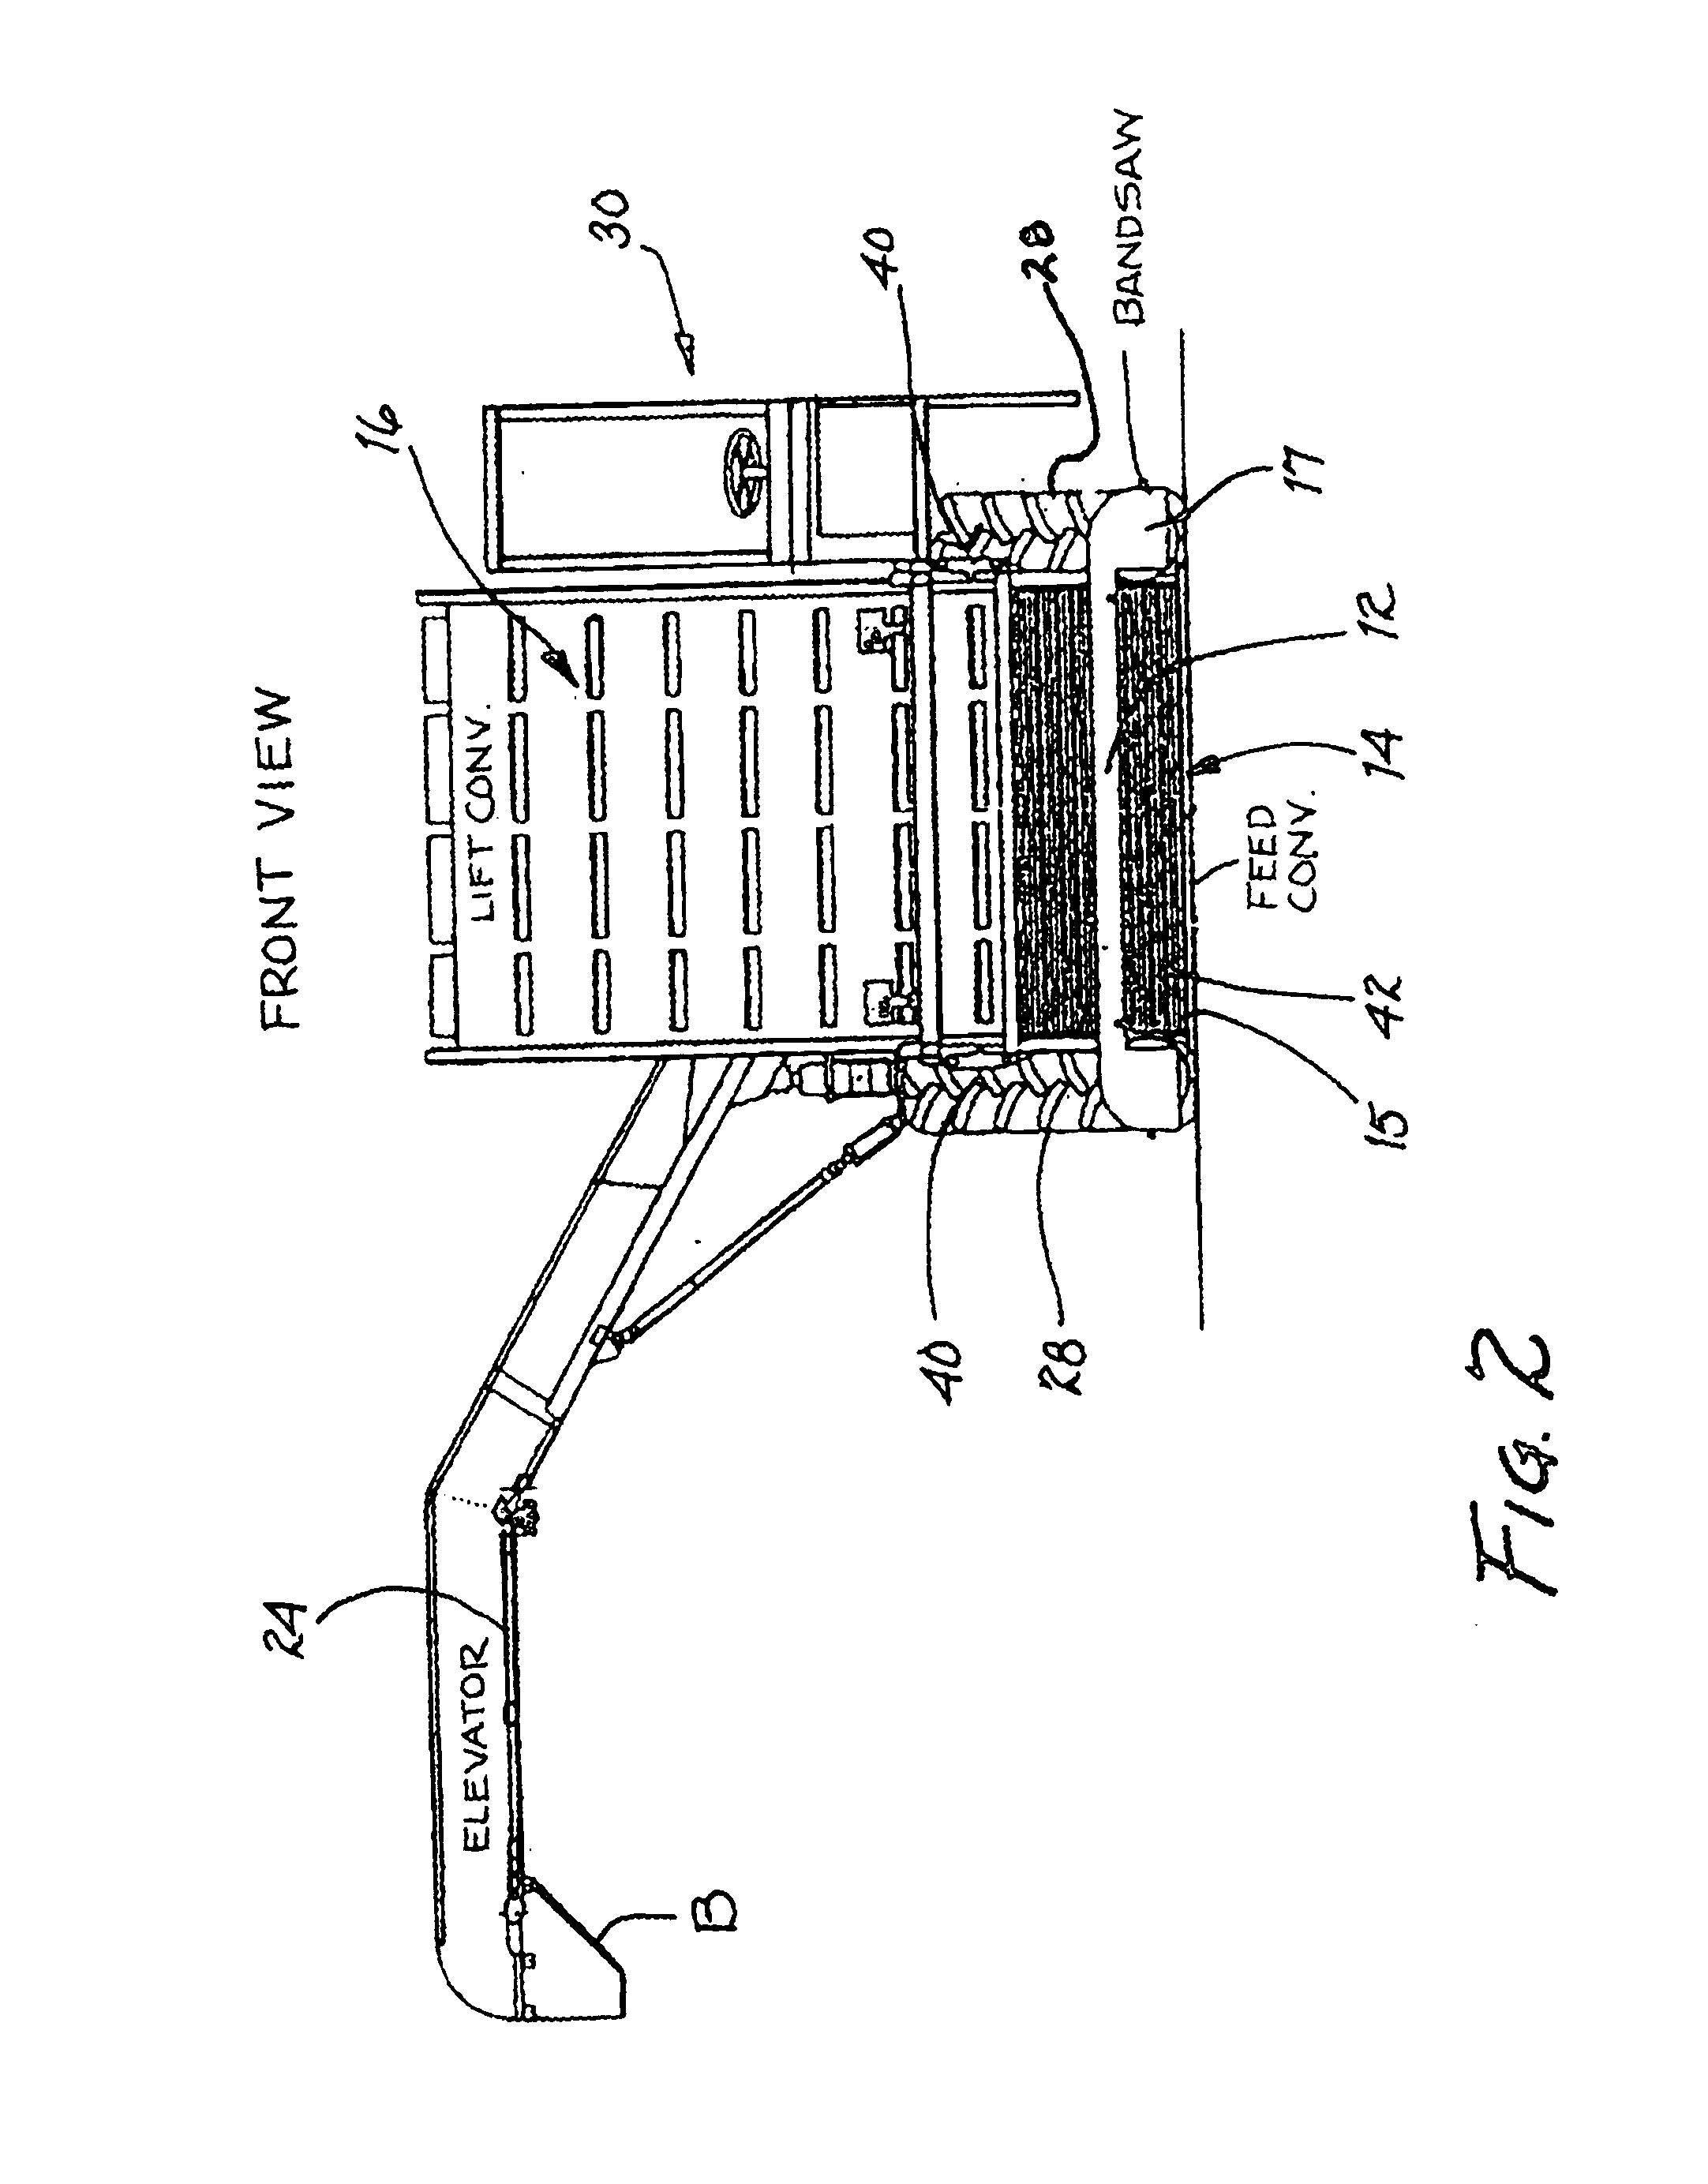 Lettuce harvesting apparatus and method therefor